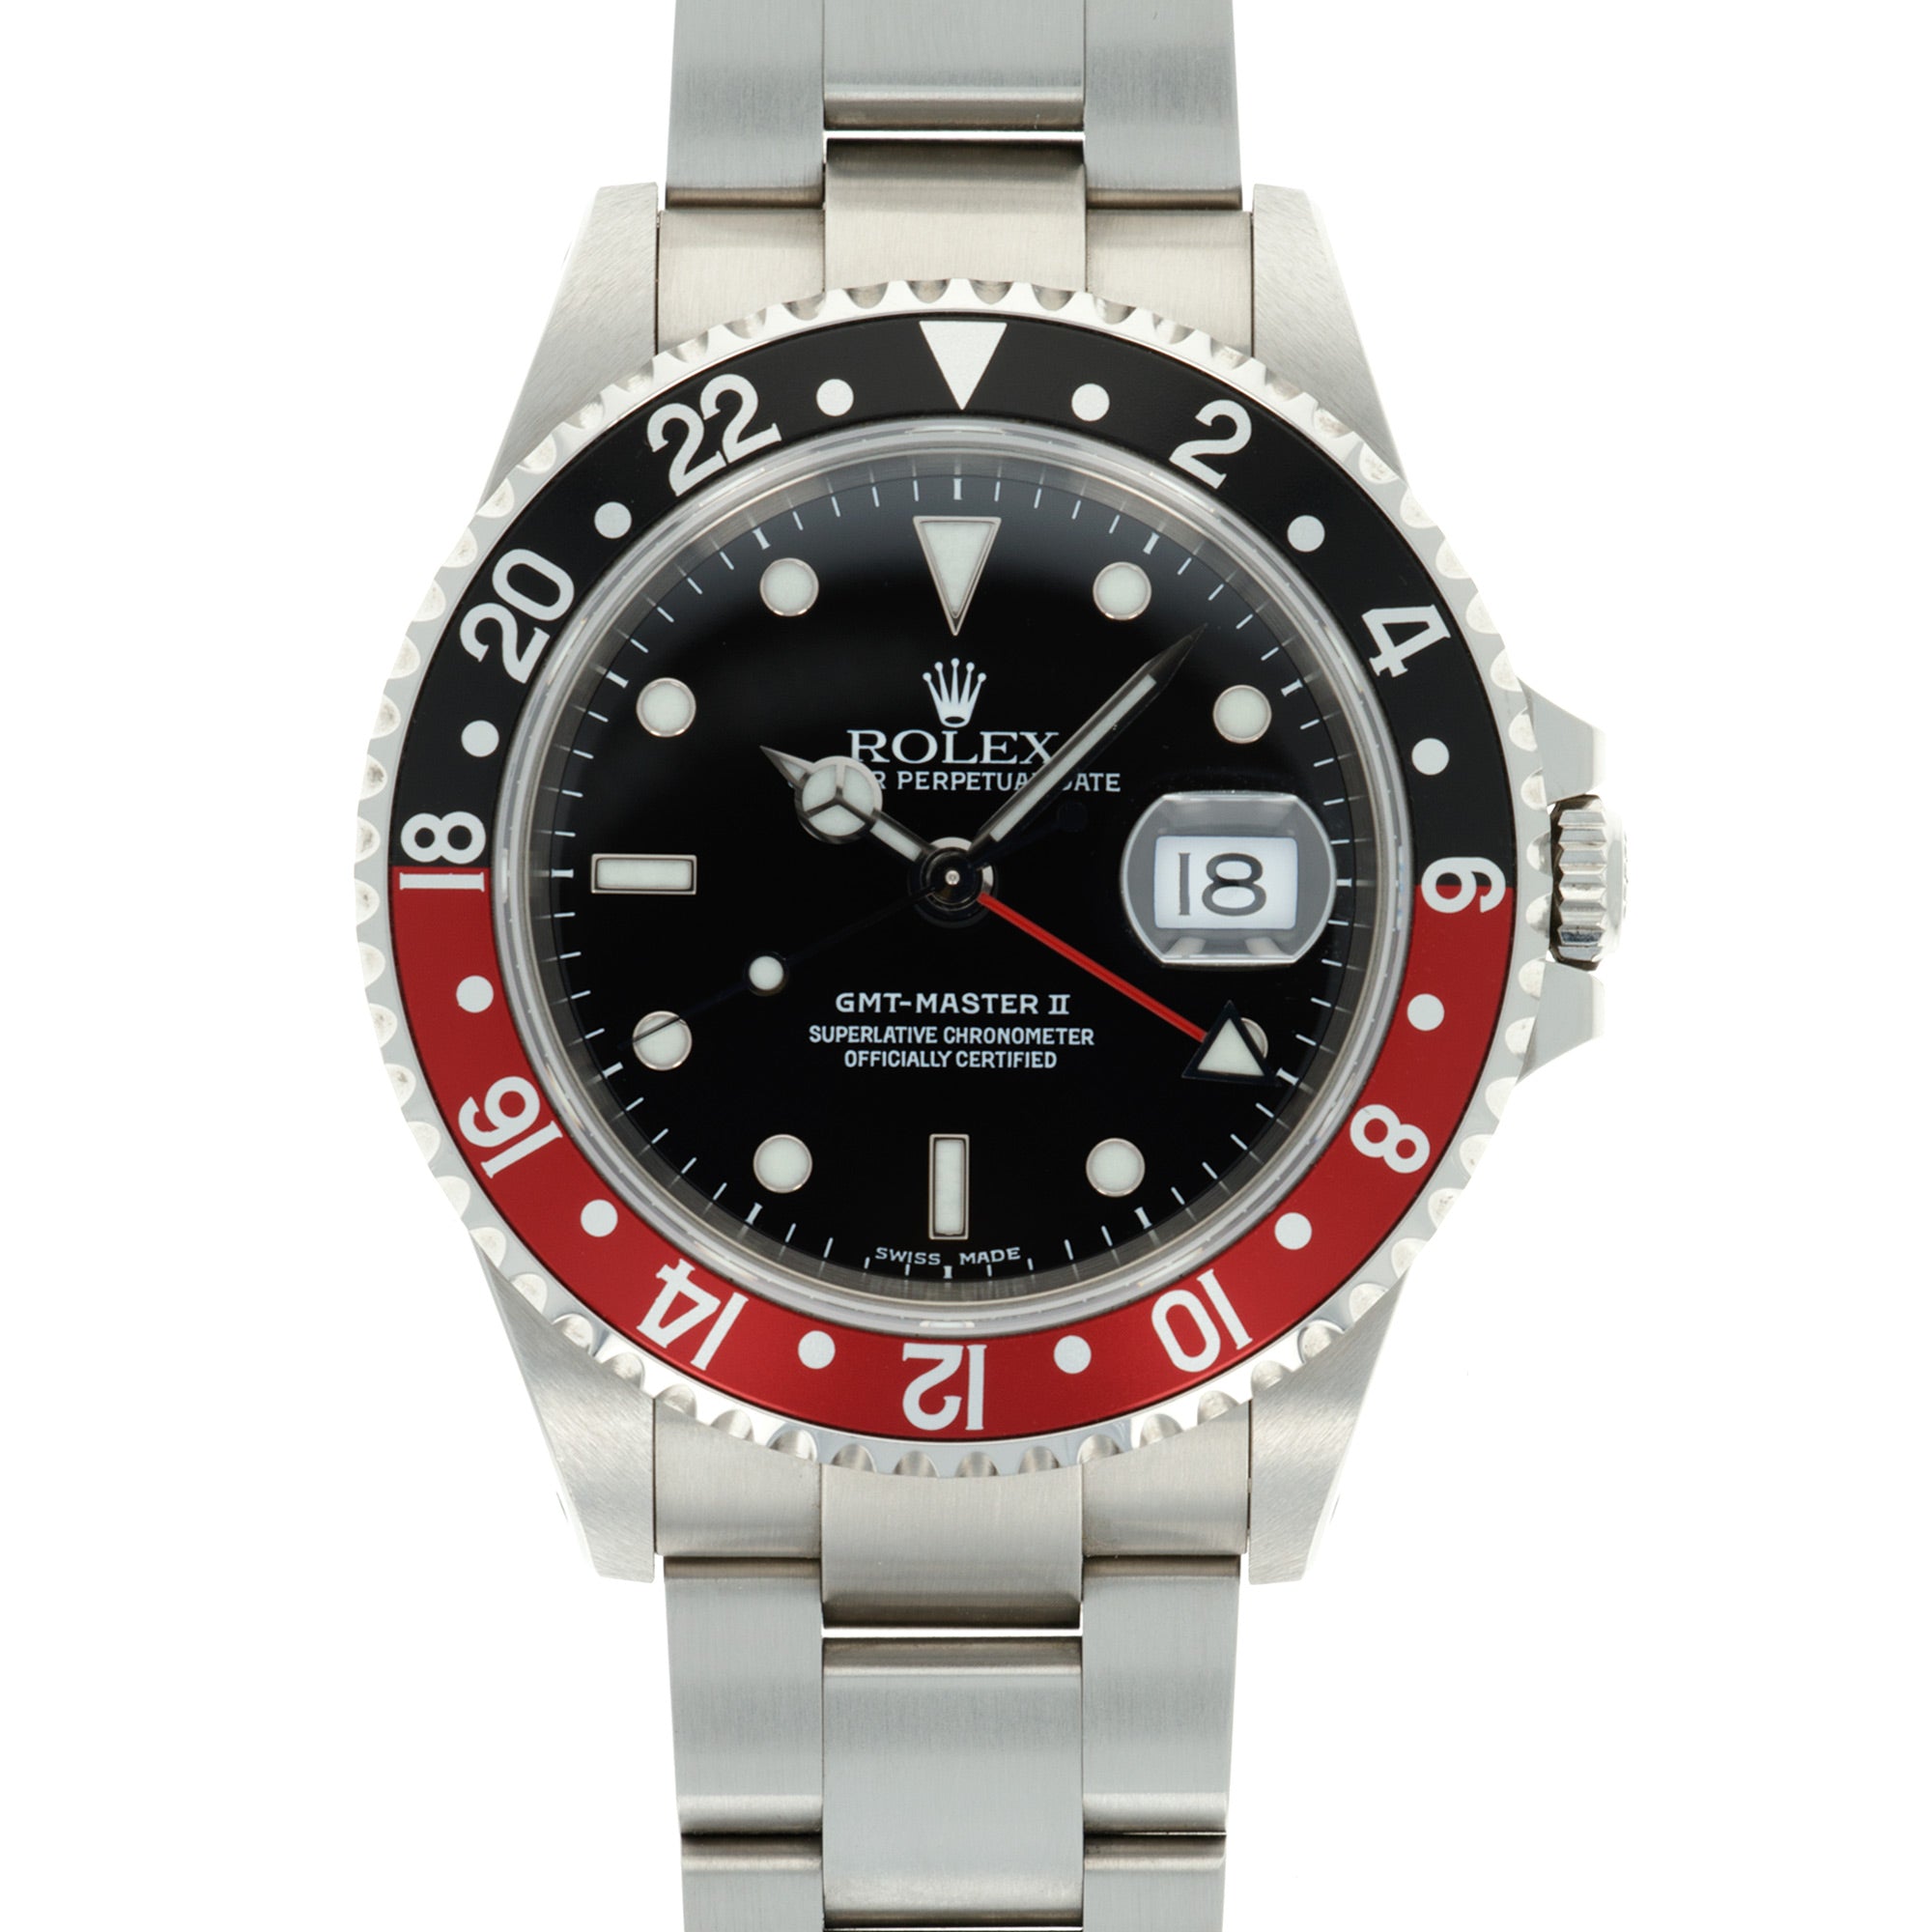 Rolex - Rolex Steel Coke GMT-Master Ref. 16710 in Mint Condition - The Keystone Watches